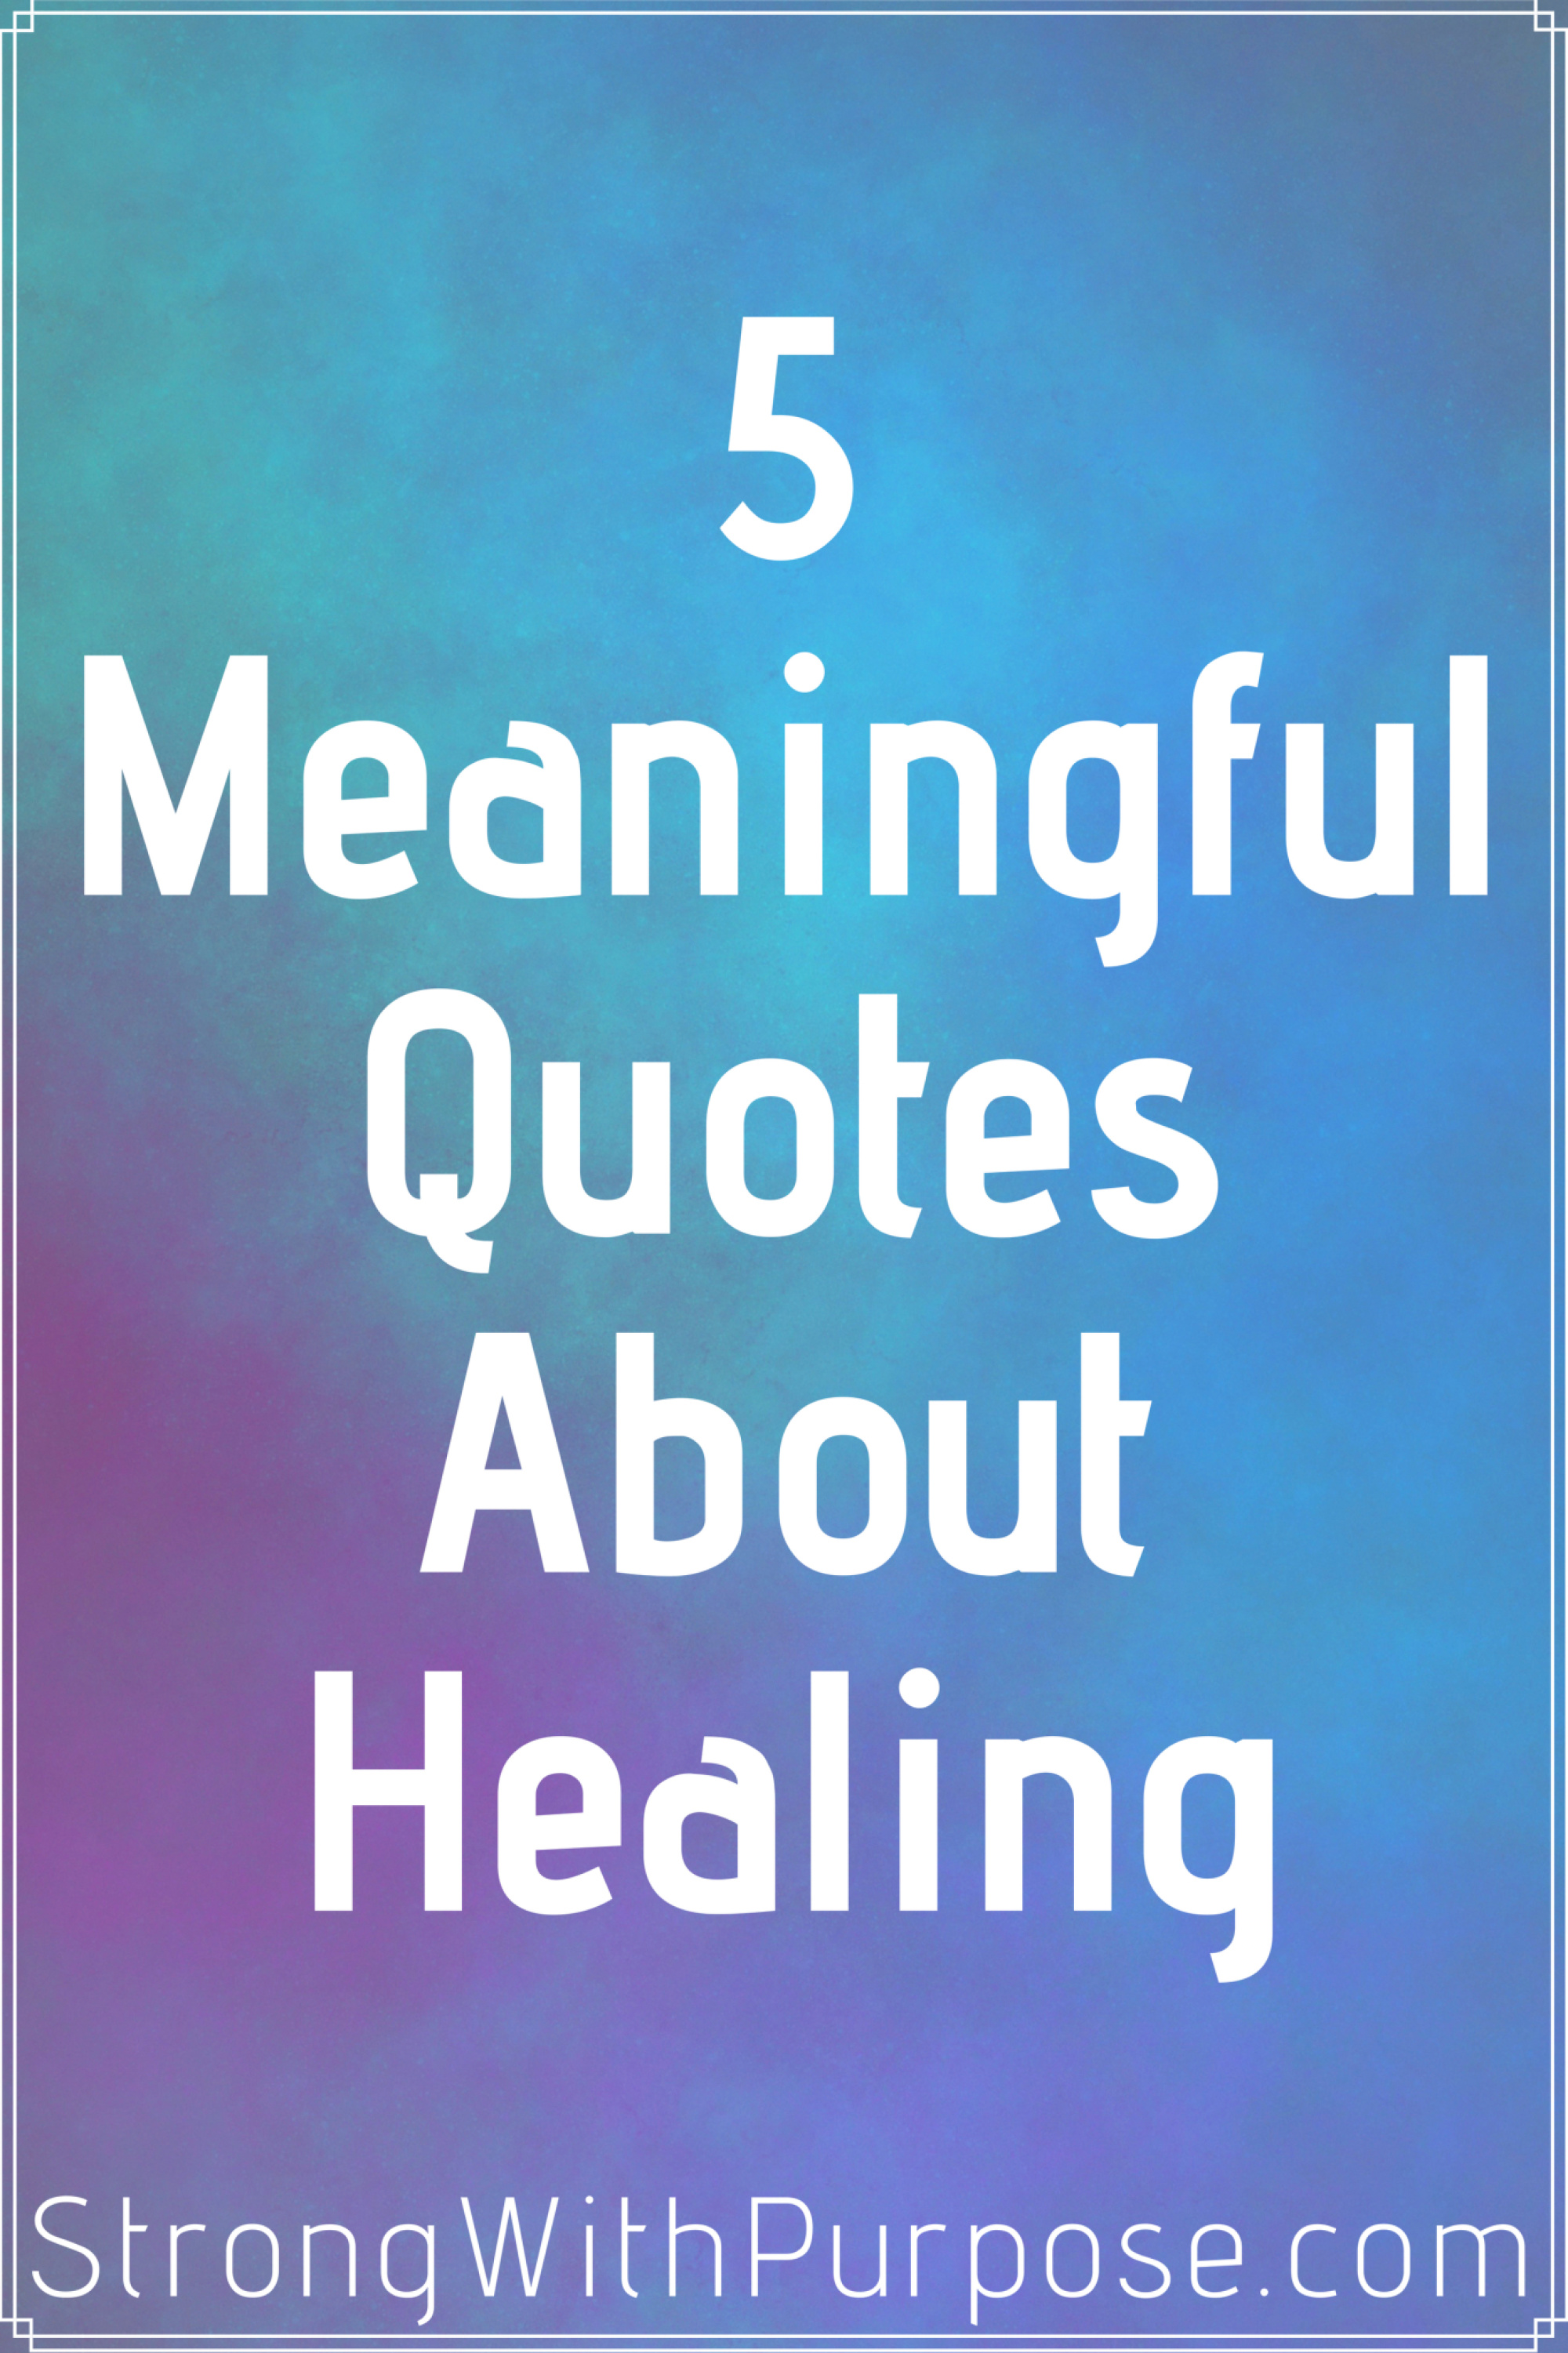 5 Meaningful Quotes About Healing - Strong with Purpose